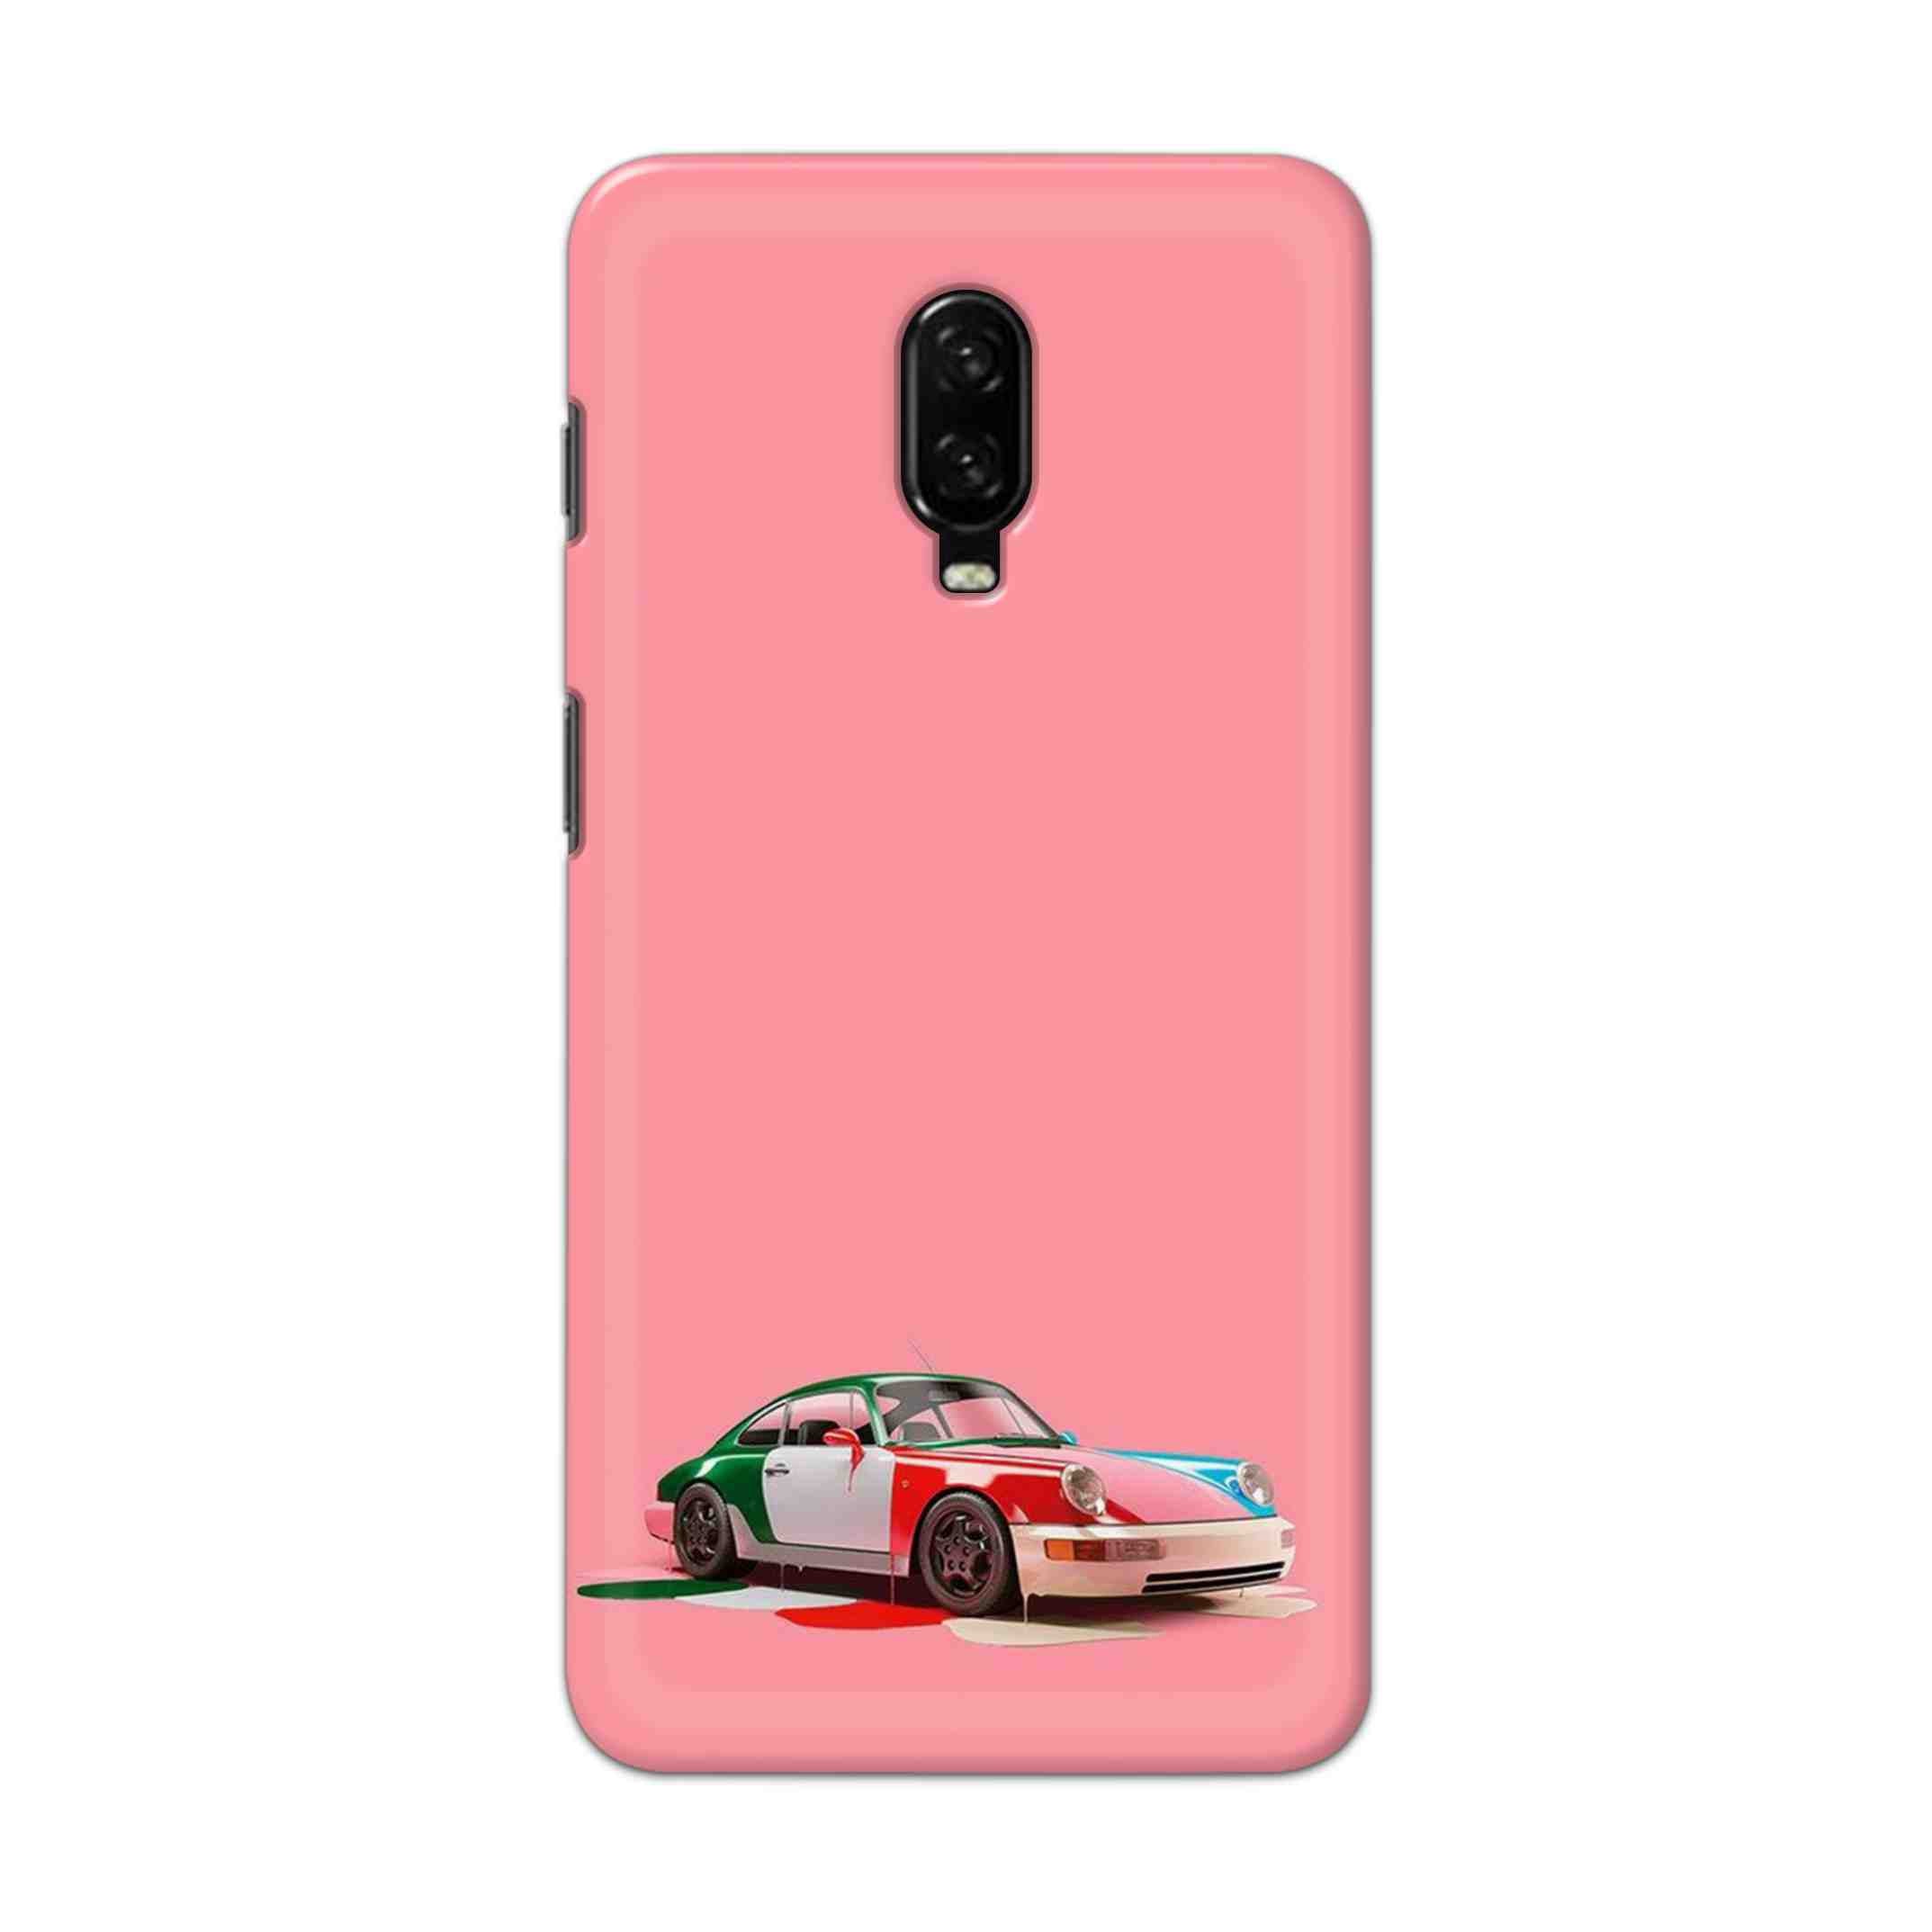 Buy Pink Porche Hard Back Mobile Phone Case Cover For OnePlus 6T Online